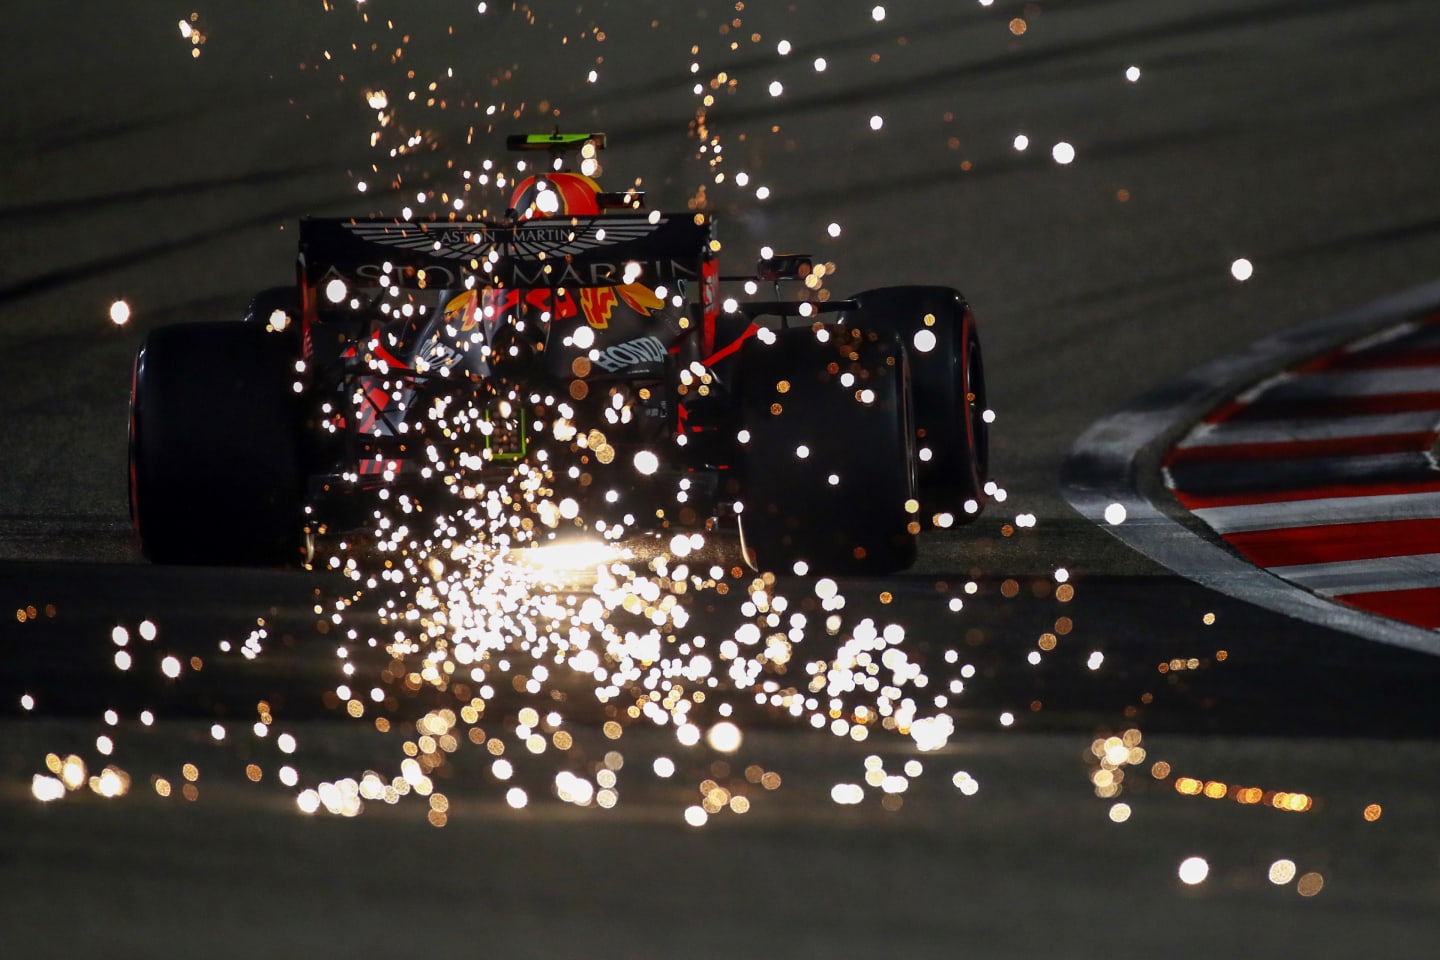 BAHRAIN, BAHRAIN - DECEMBER 05: Sparks fly behind Alexander Albon of Thailand driving the (23) Aston Martin Red Bull Racing RB16 during qualifying ahead of the F1 Grand Prix of Sakhir at Bahrain International Circuit on December 05, 2020 in Bahrain, Bahrain. (Photo by Bryn Lennon/Getty Images)